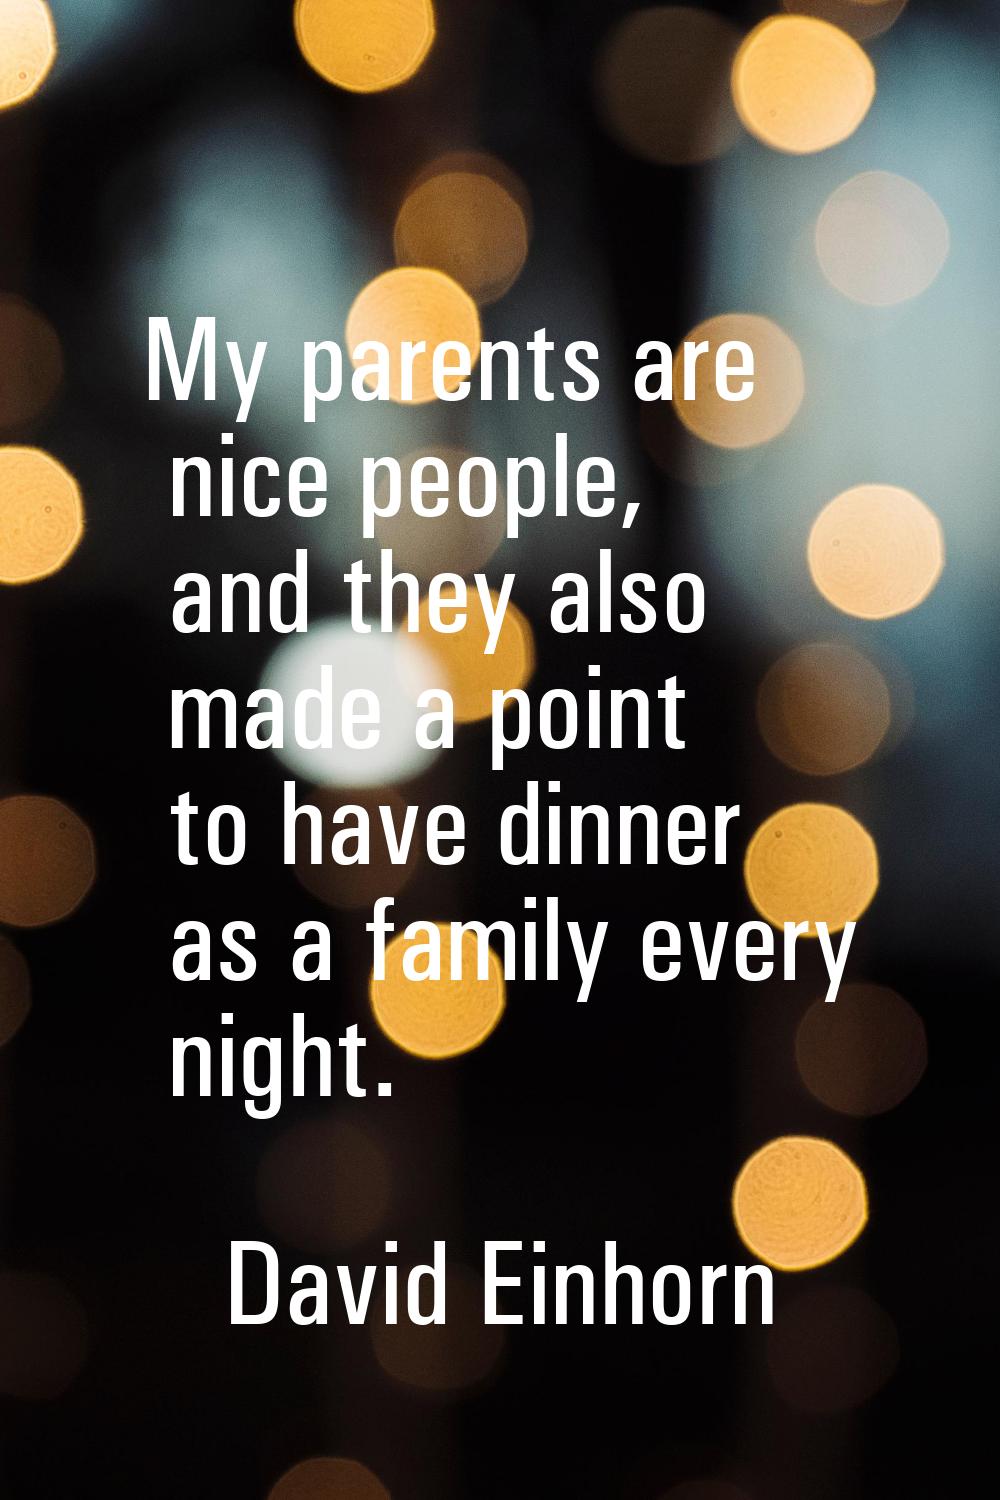 My parents are nice people, and they also made a point to have dinner as a family every night.